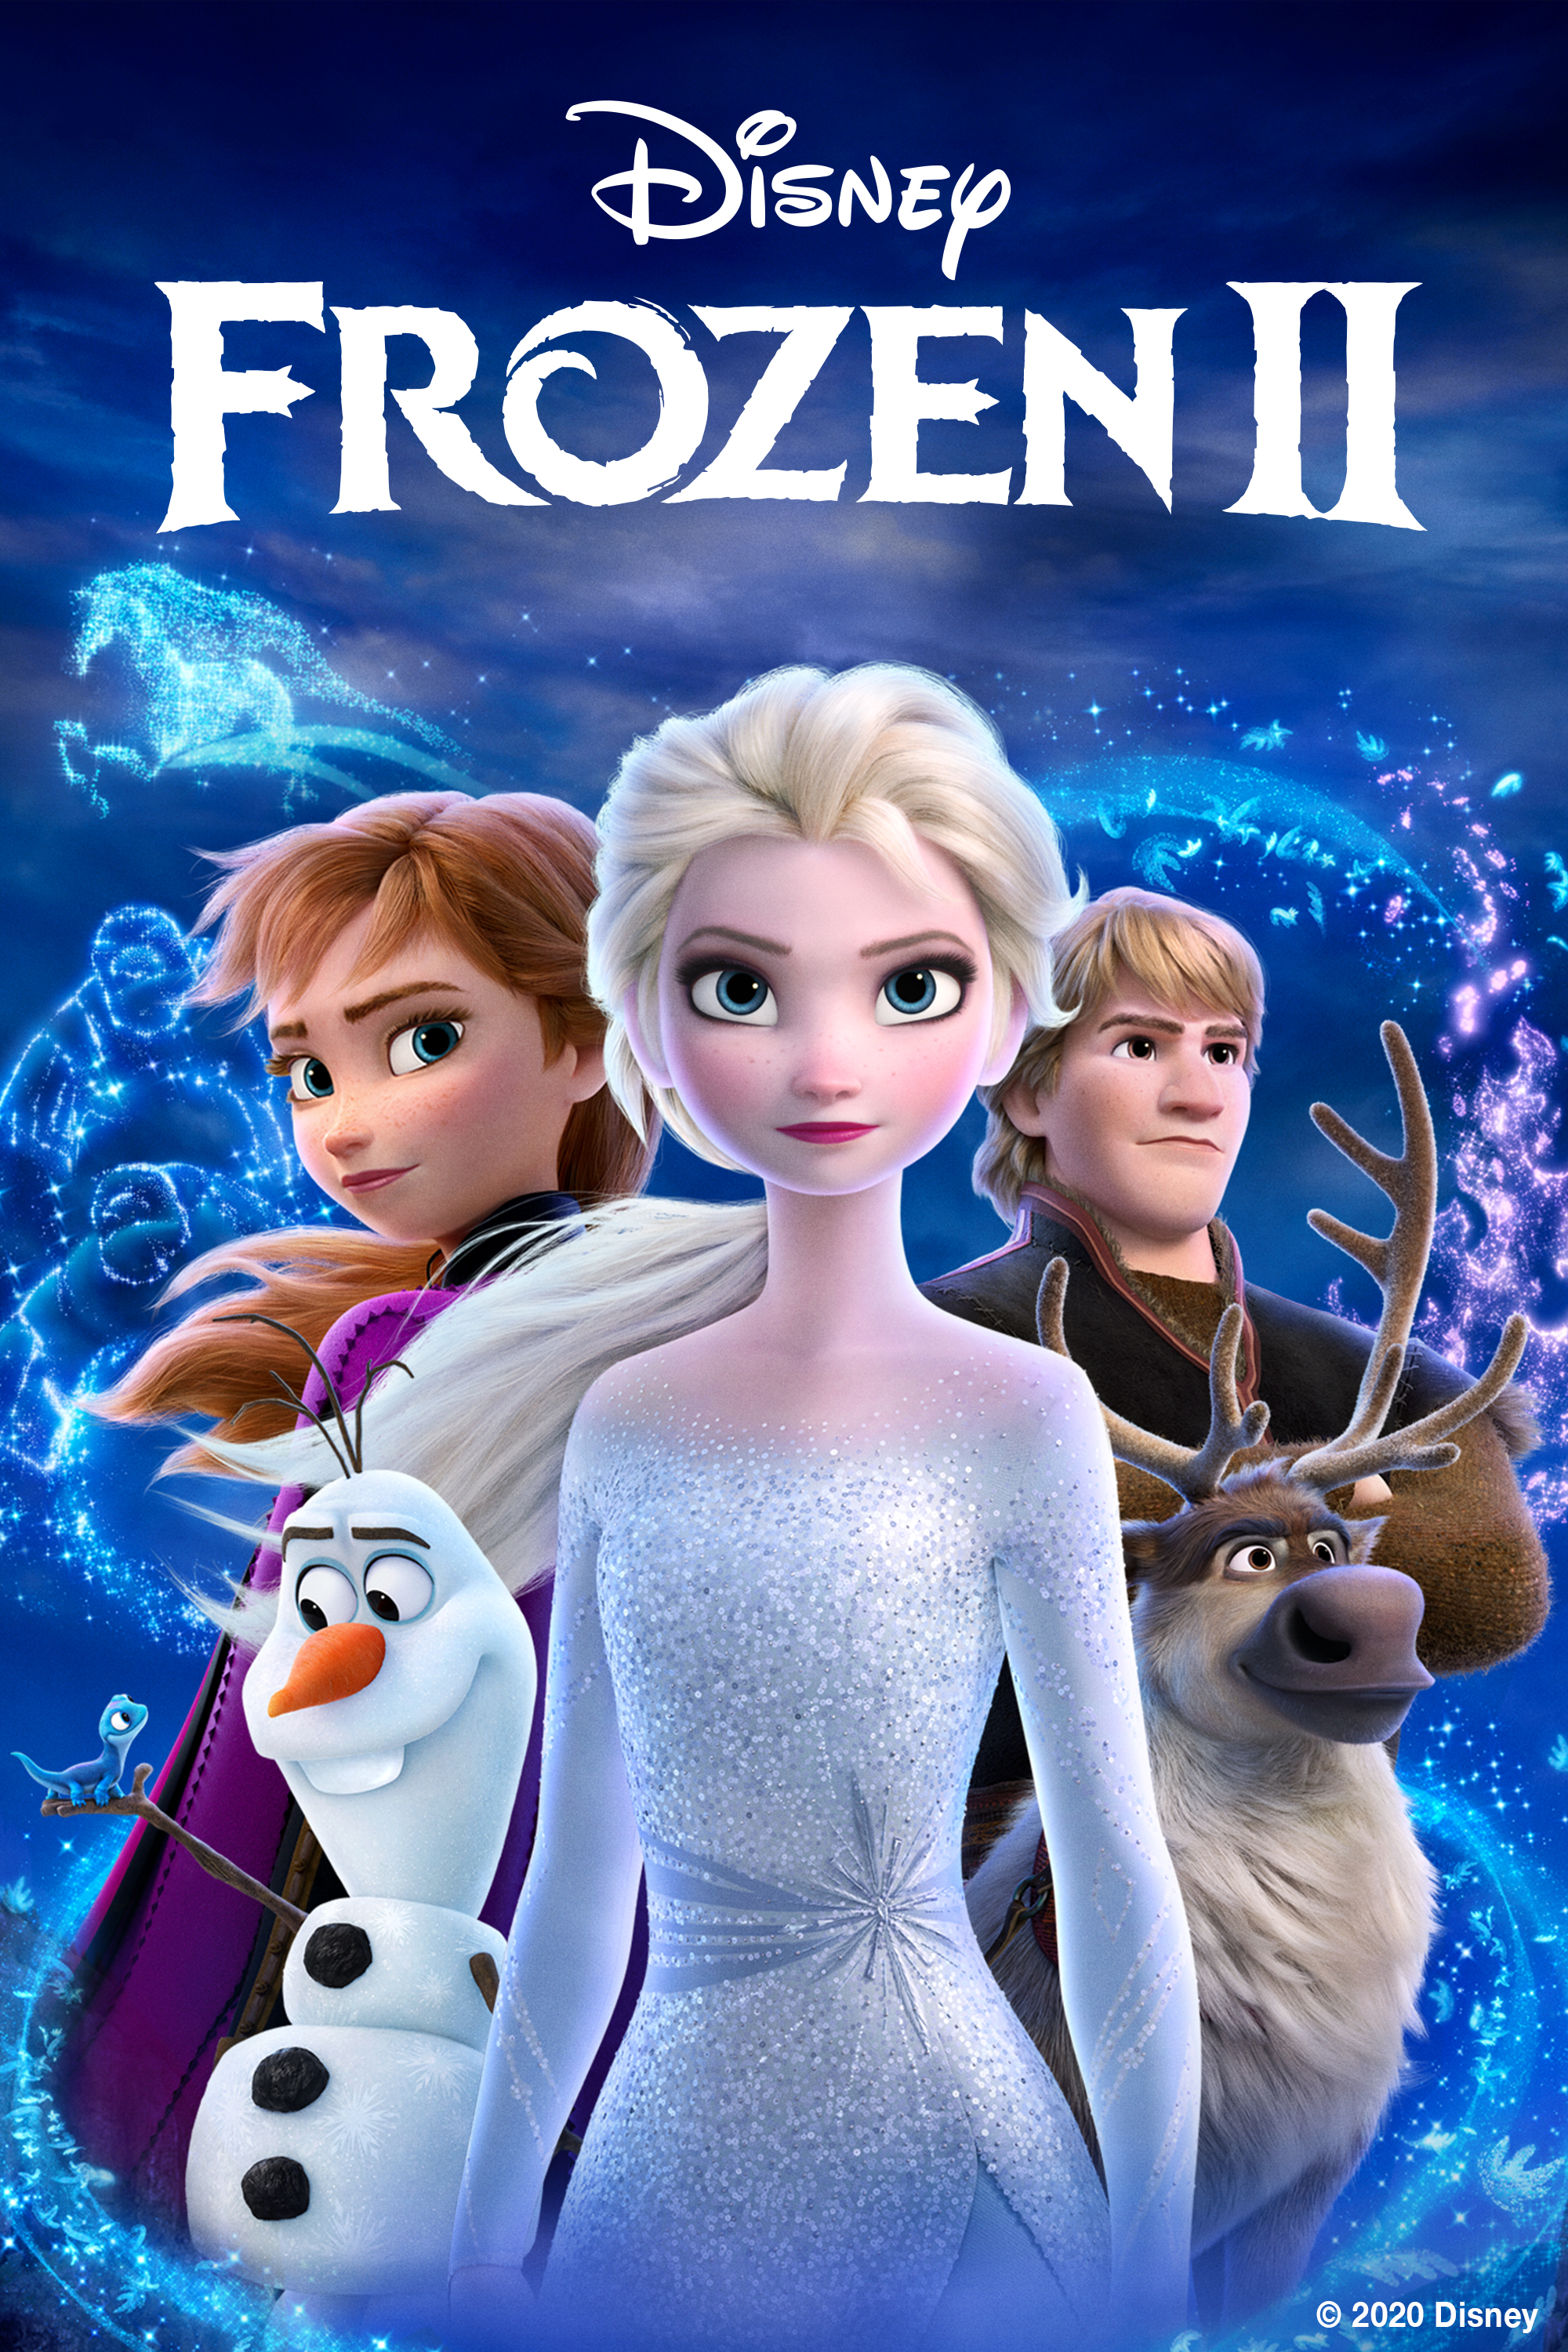 Frozen 2, Saturday, May 16 @ 11:00 A.M.